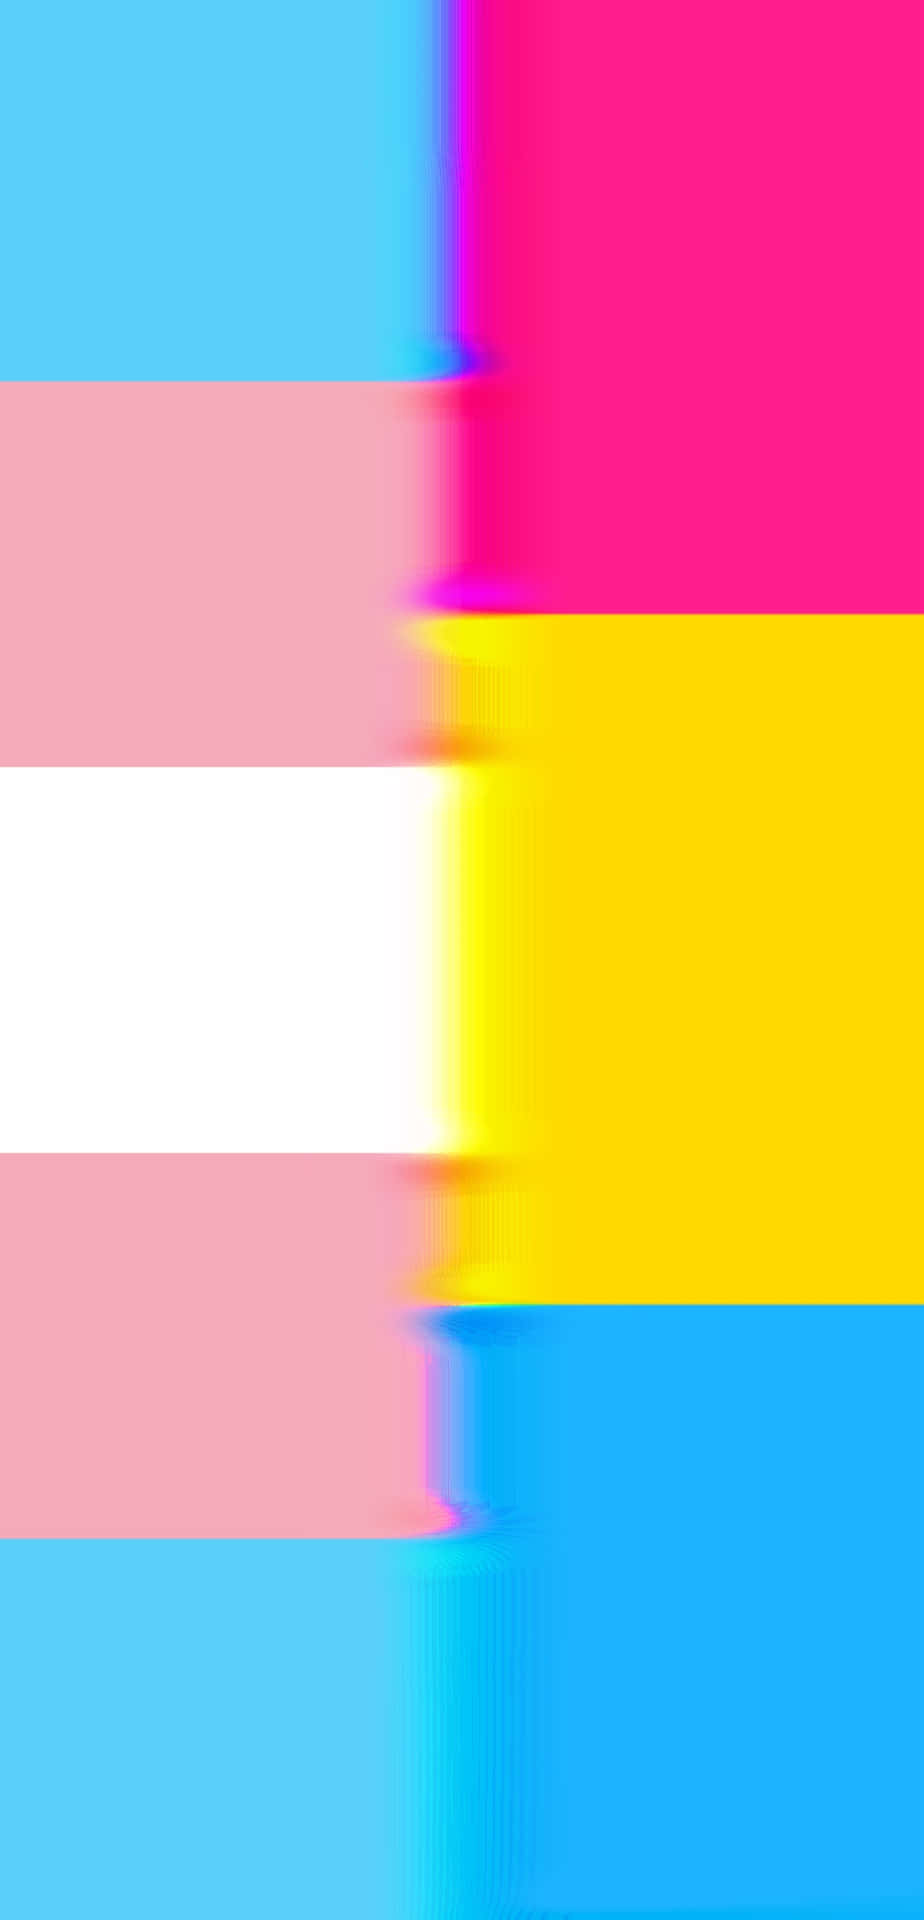 Transgender Flag With Rainbow Colors